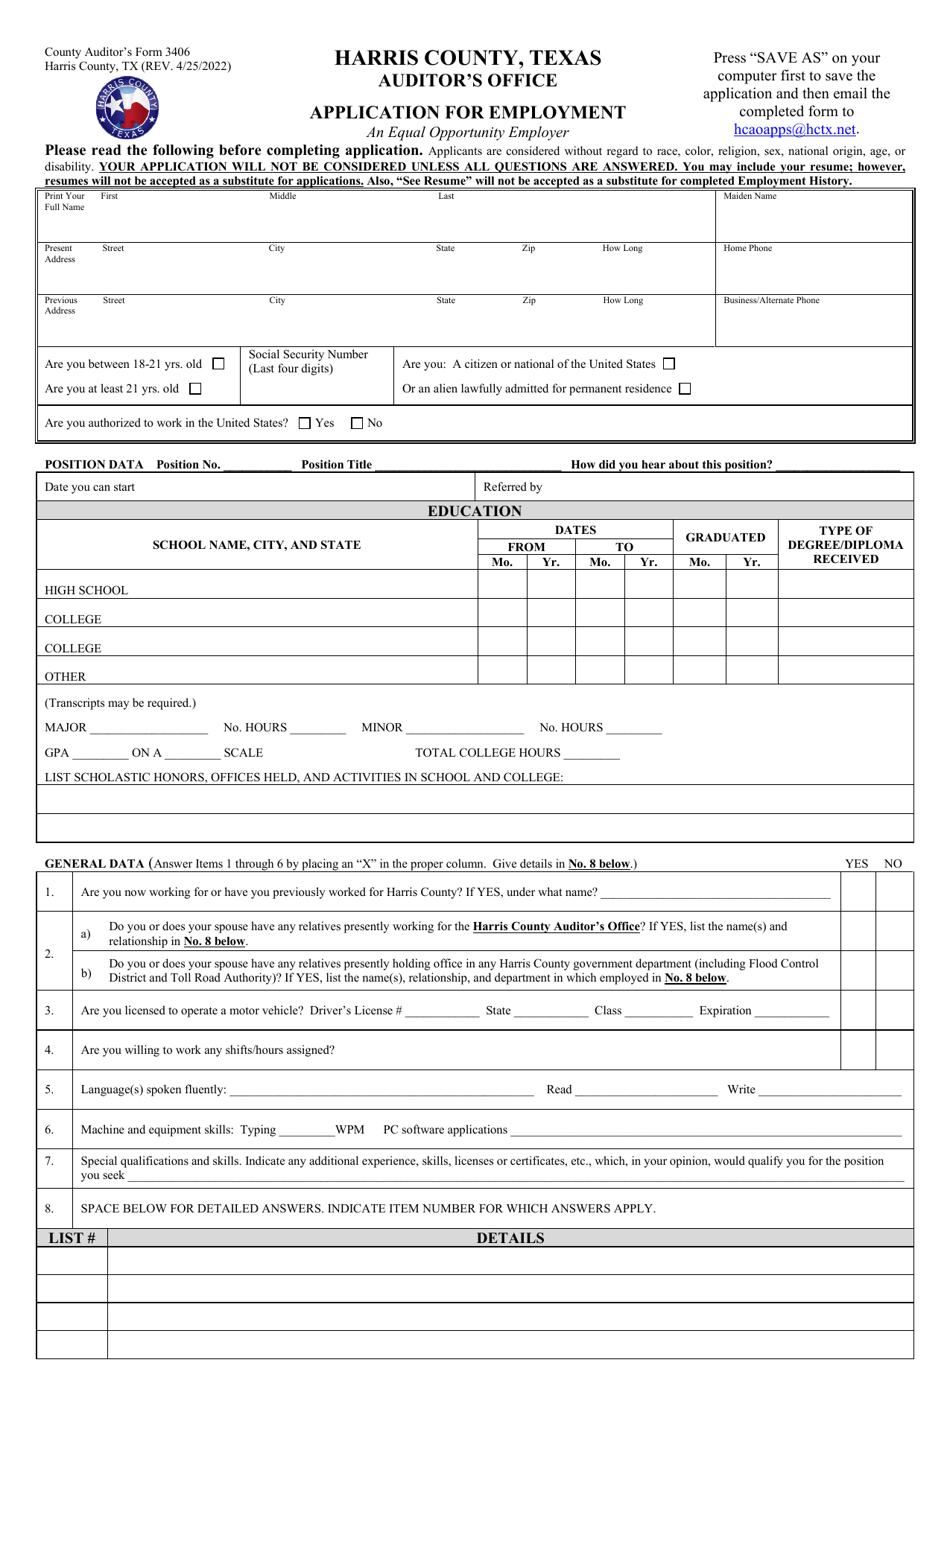 Form 3406 Application for Employment - Harris County, Texas, Page 1